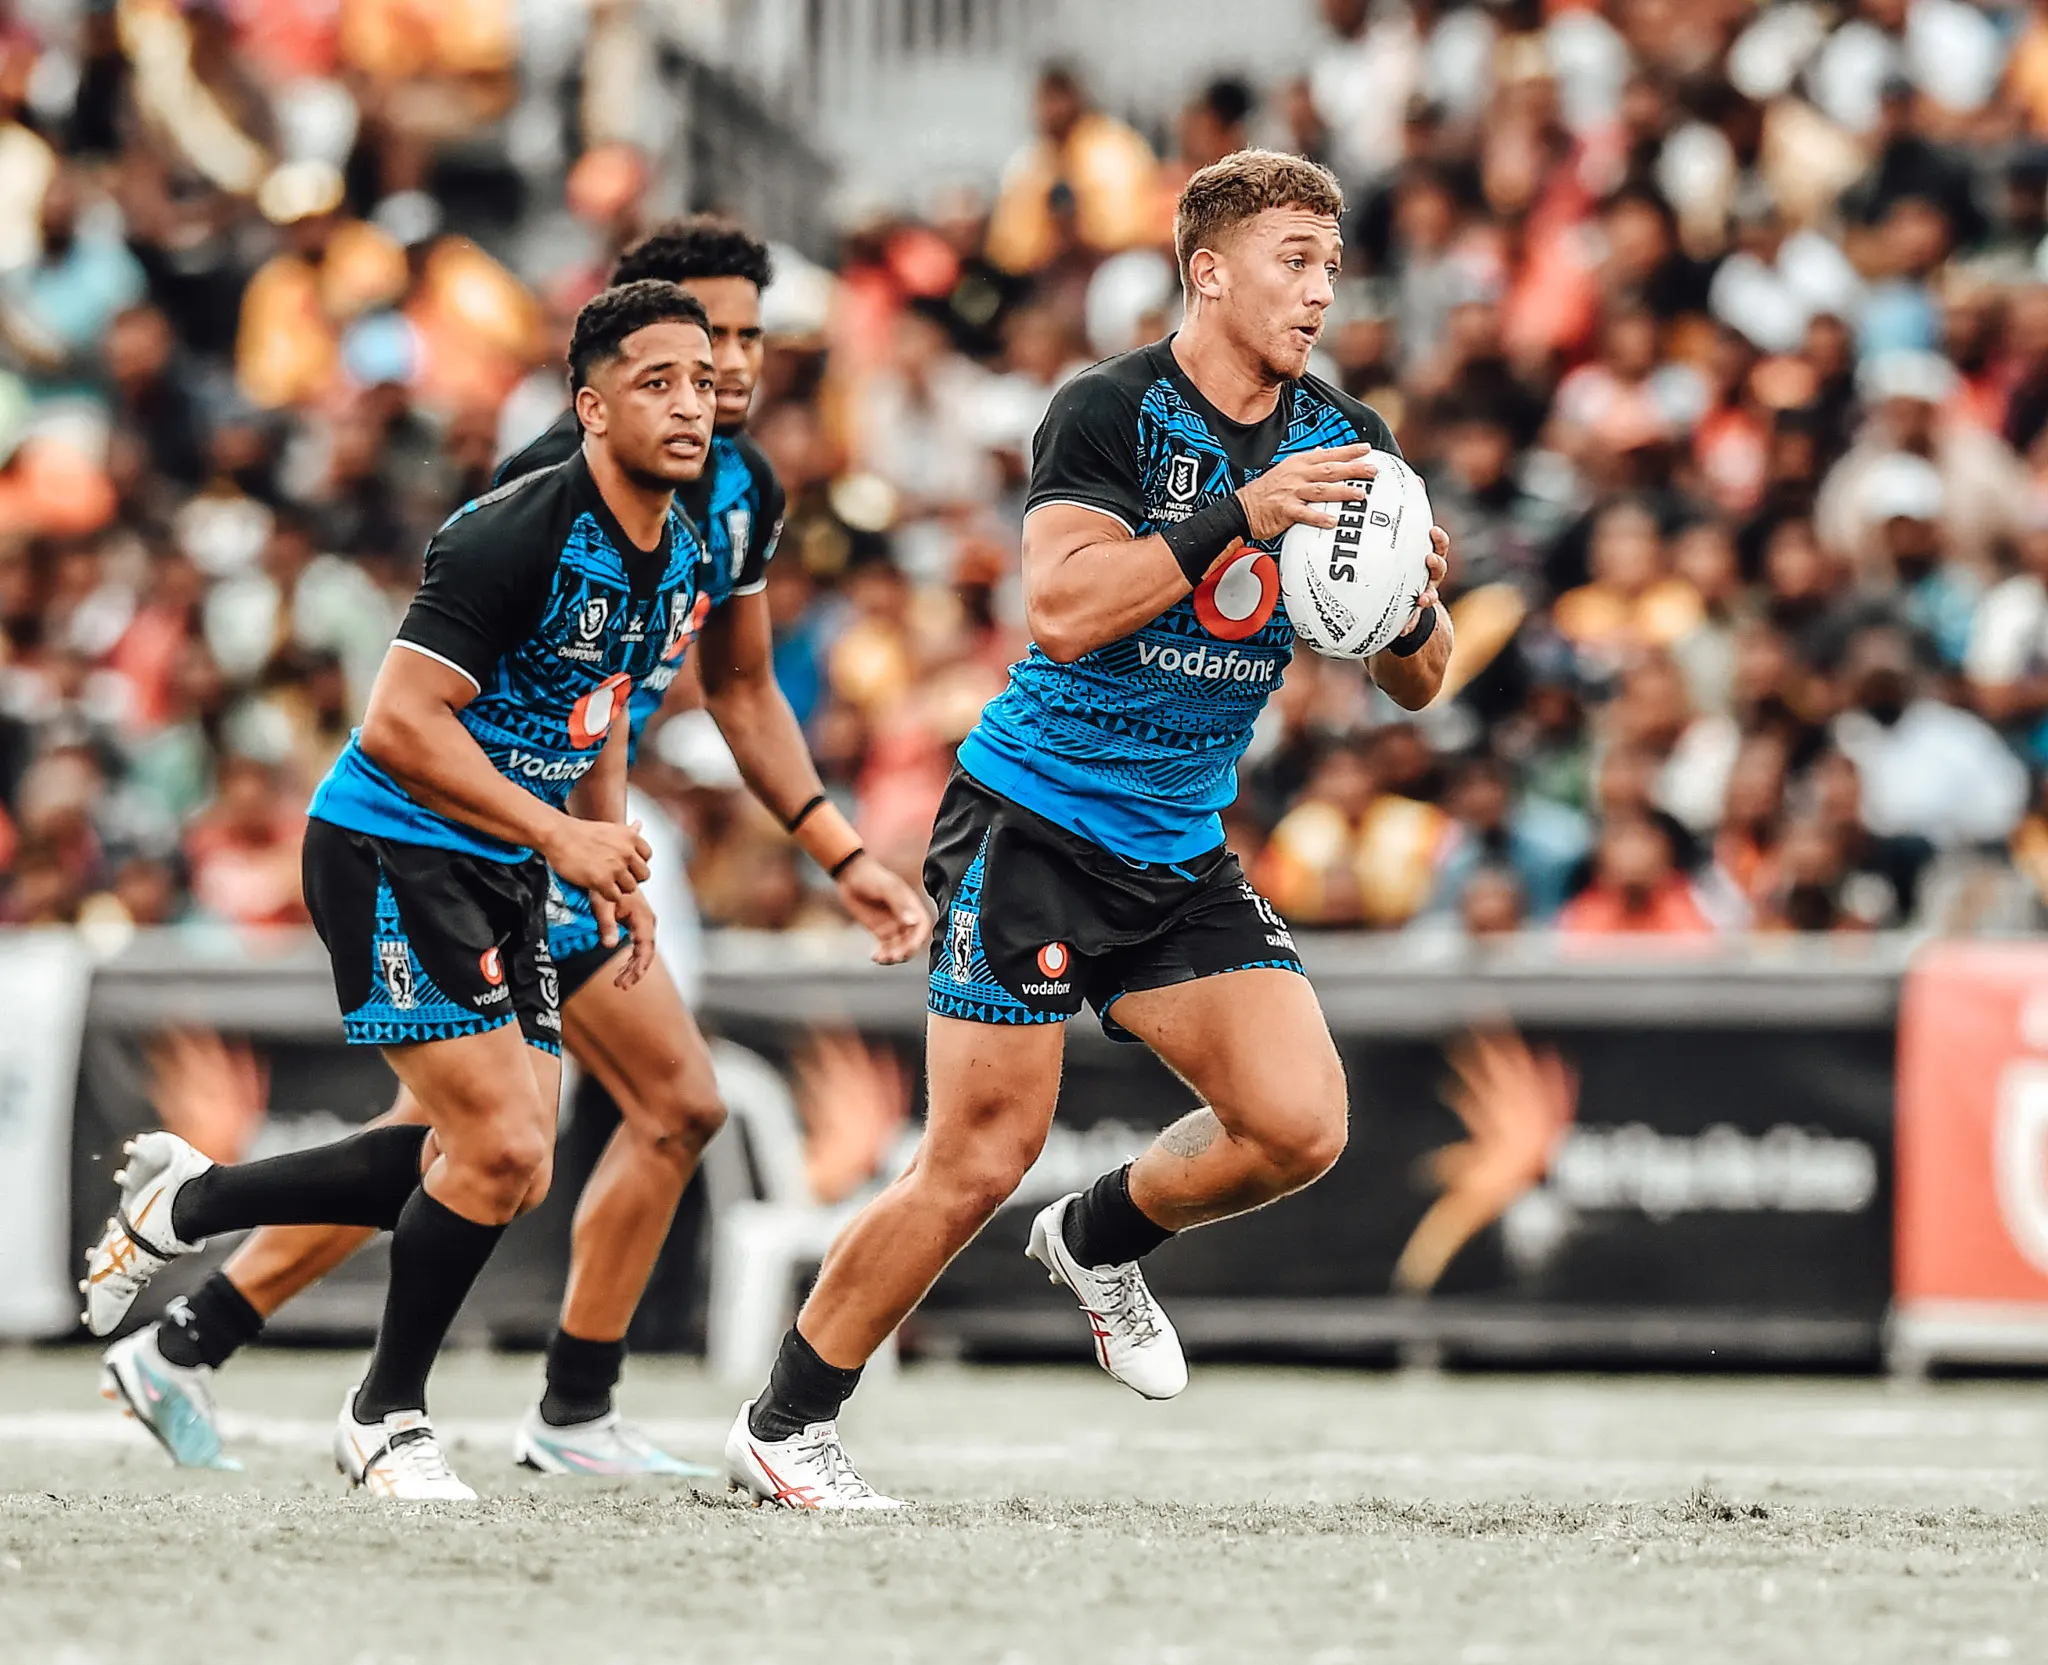 Rugby Action: Fiji Bati in Their Jerseys